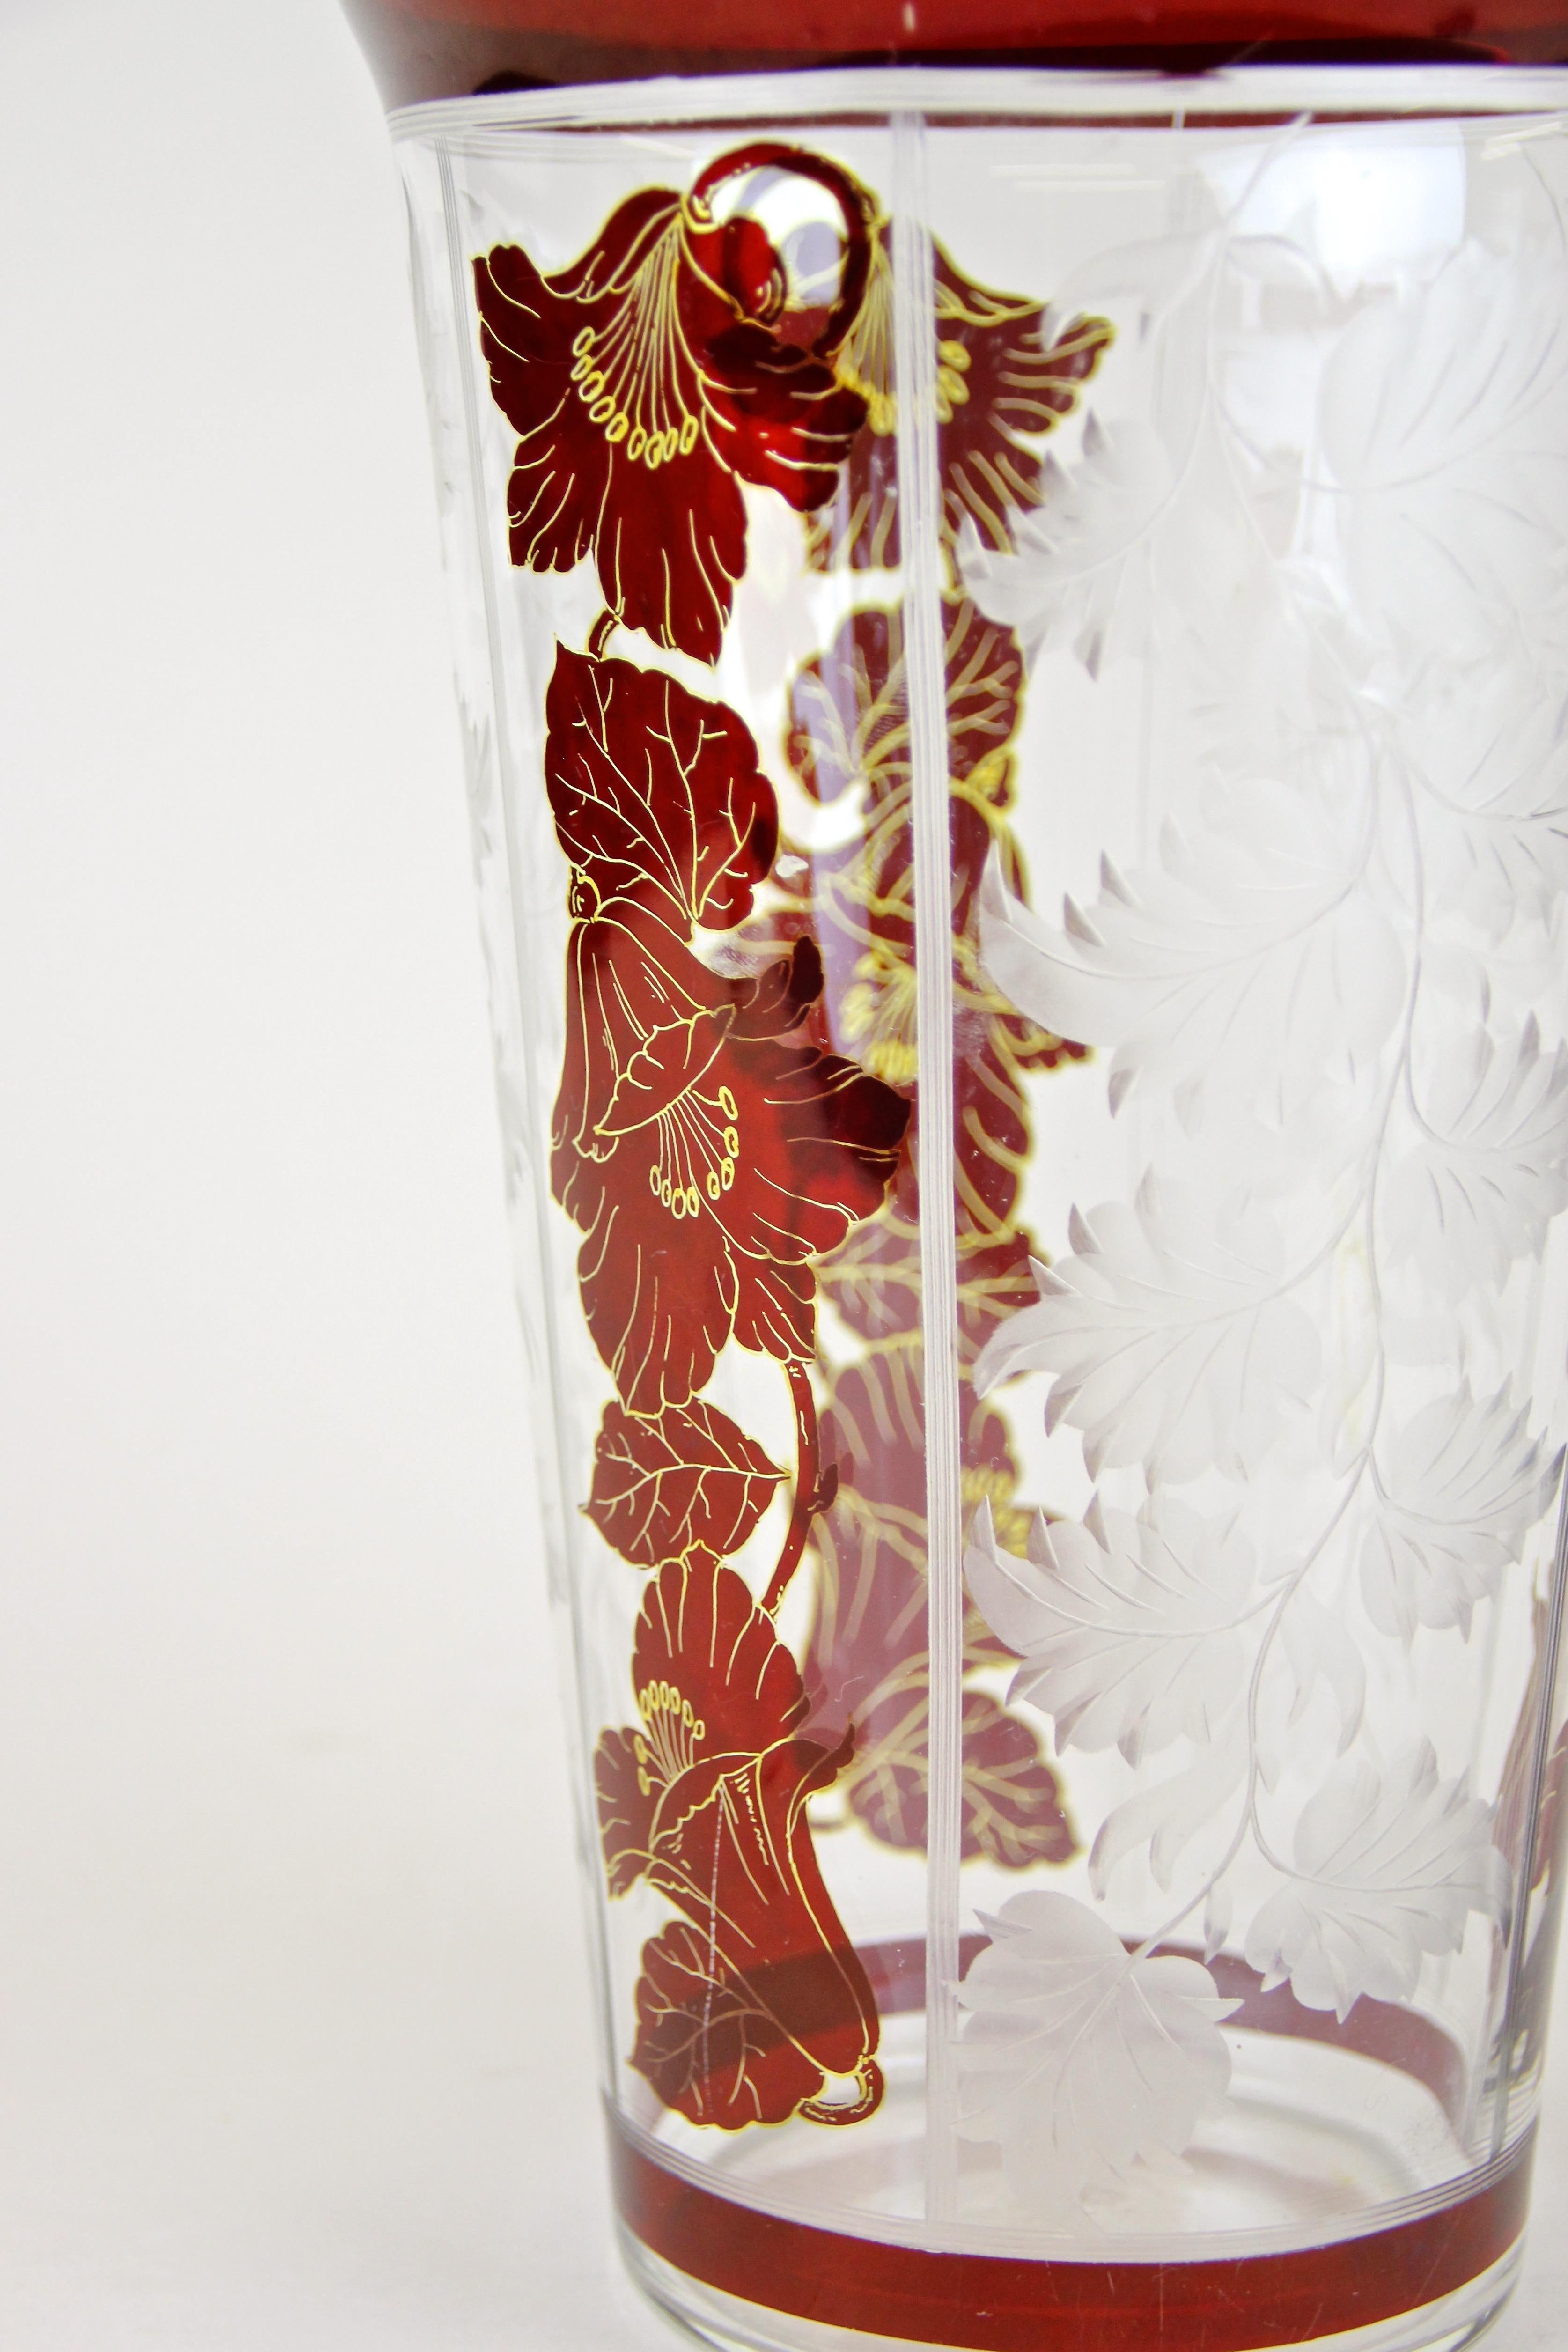 Charming Art Nouveau glass vase with flowers and engraved leaves from the early period in Austria, circa 1900. The artfully designed vase enchants with lovely dark red flower prints adorned by golden accents and extraordinary engraved leaves,